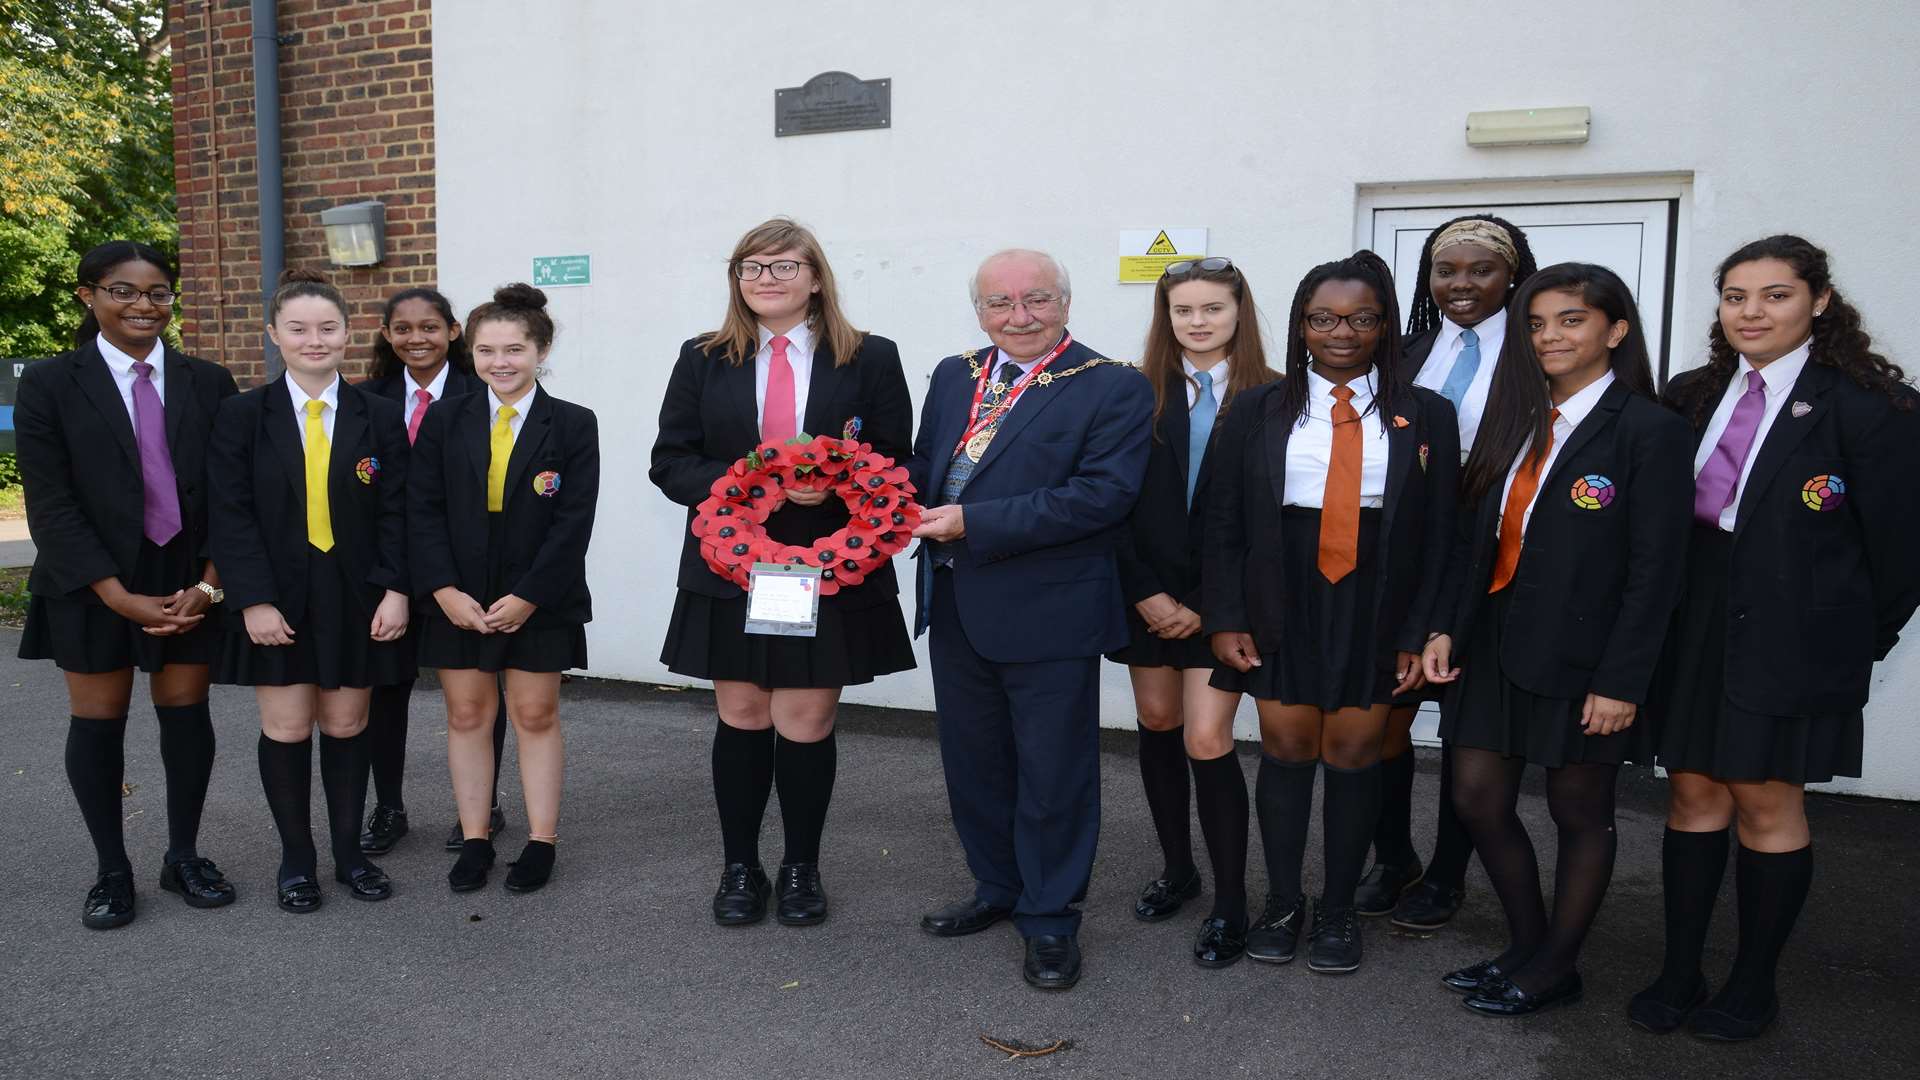 Mayor of Gravsham Harold Craske and pupils lay a wreath at the plaque Service of commemoration for Thomas Colyer-Fergusson